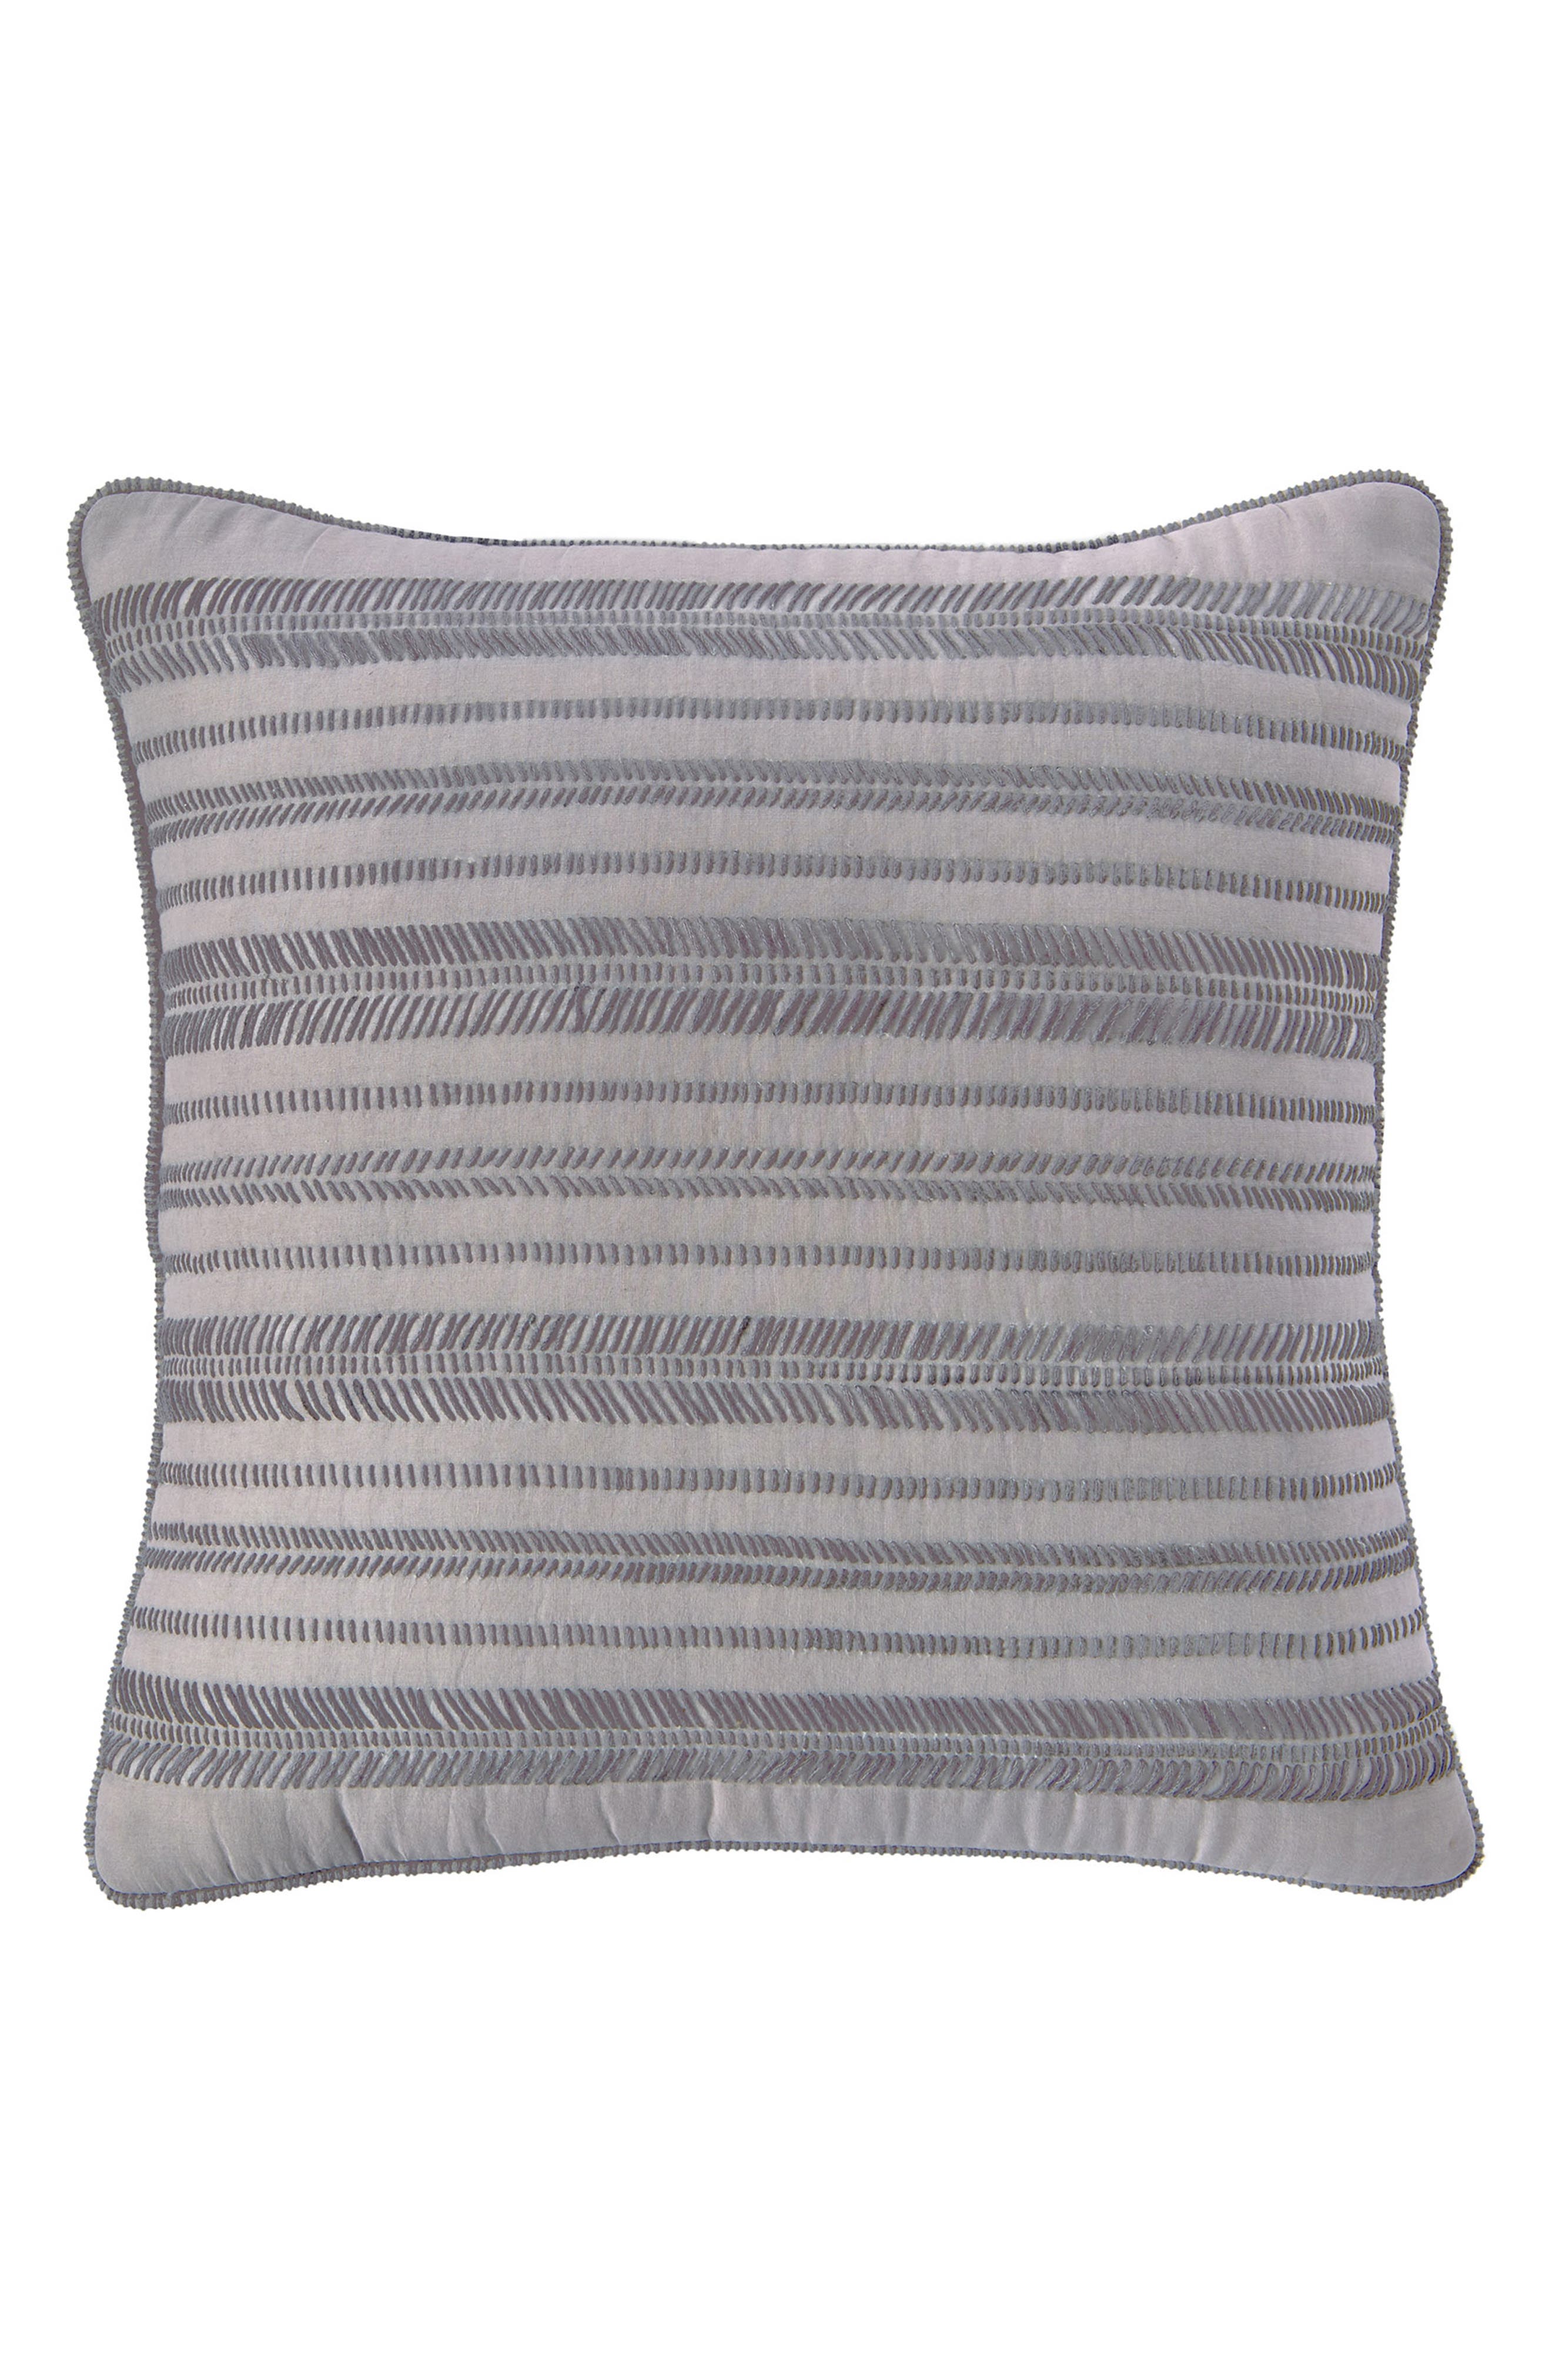 Splendid Home Decor Embroidered Voile Accent Pillow - Sale up to 64%